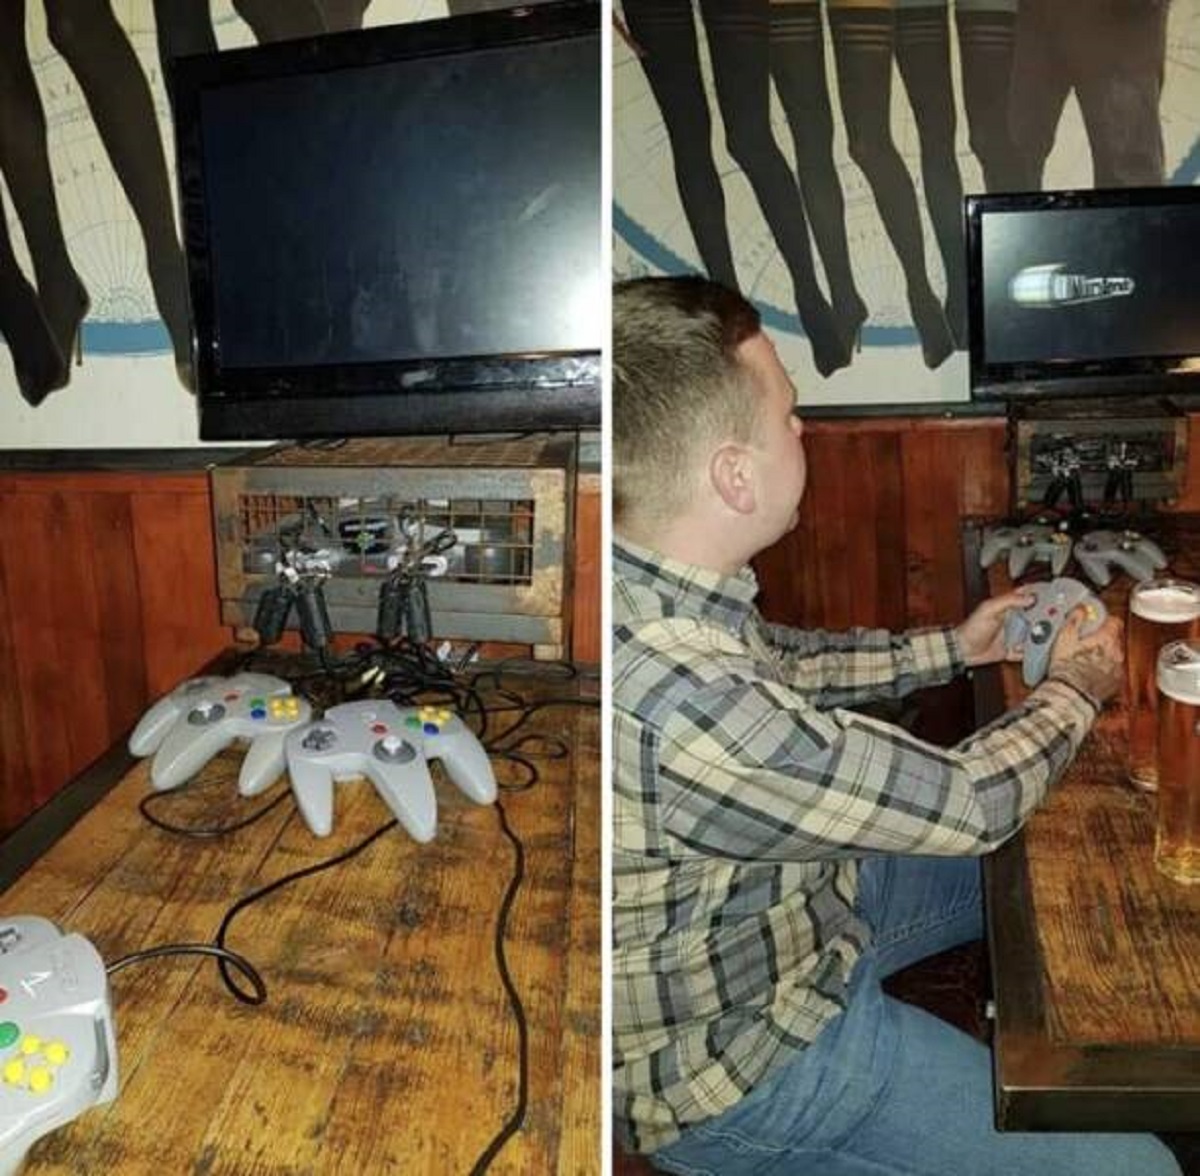 This bar in the UK with N64s at every table is also very retro and cool.